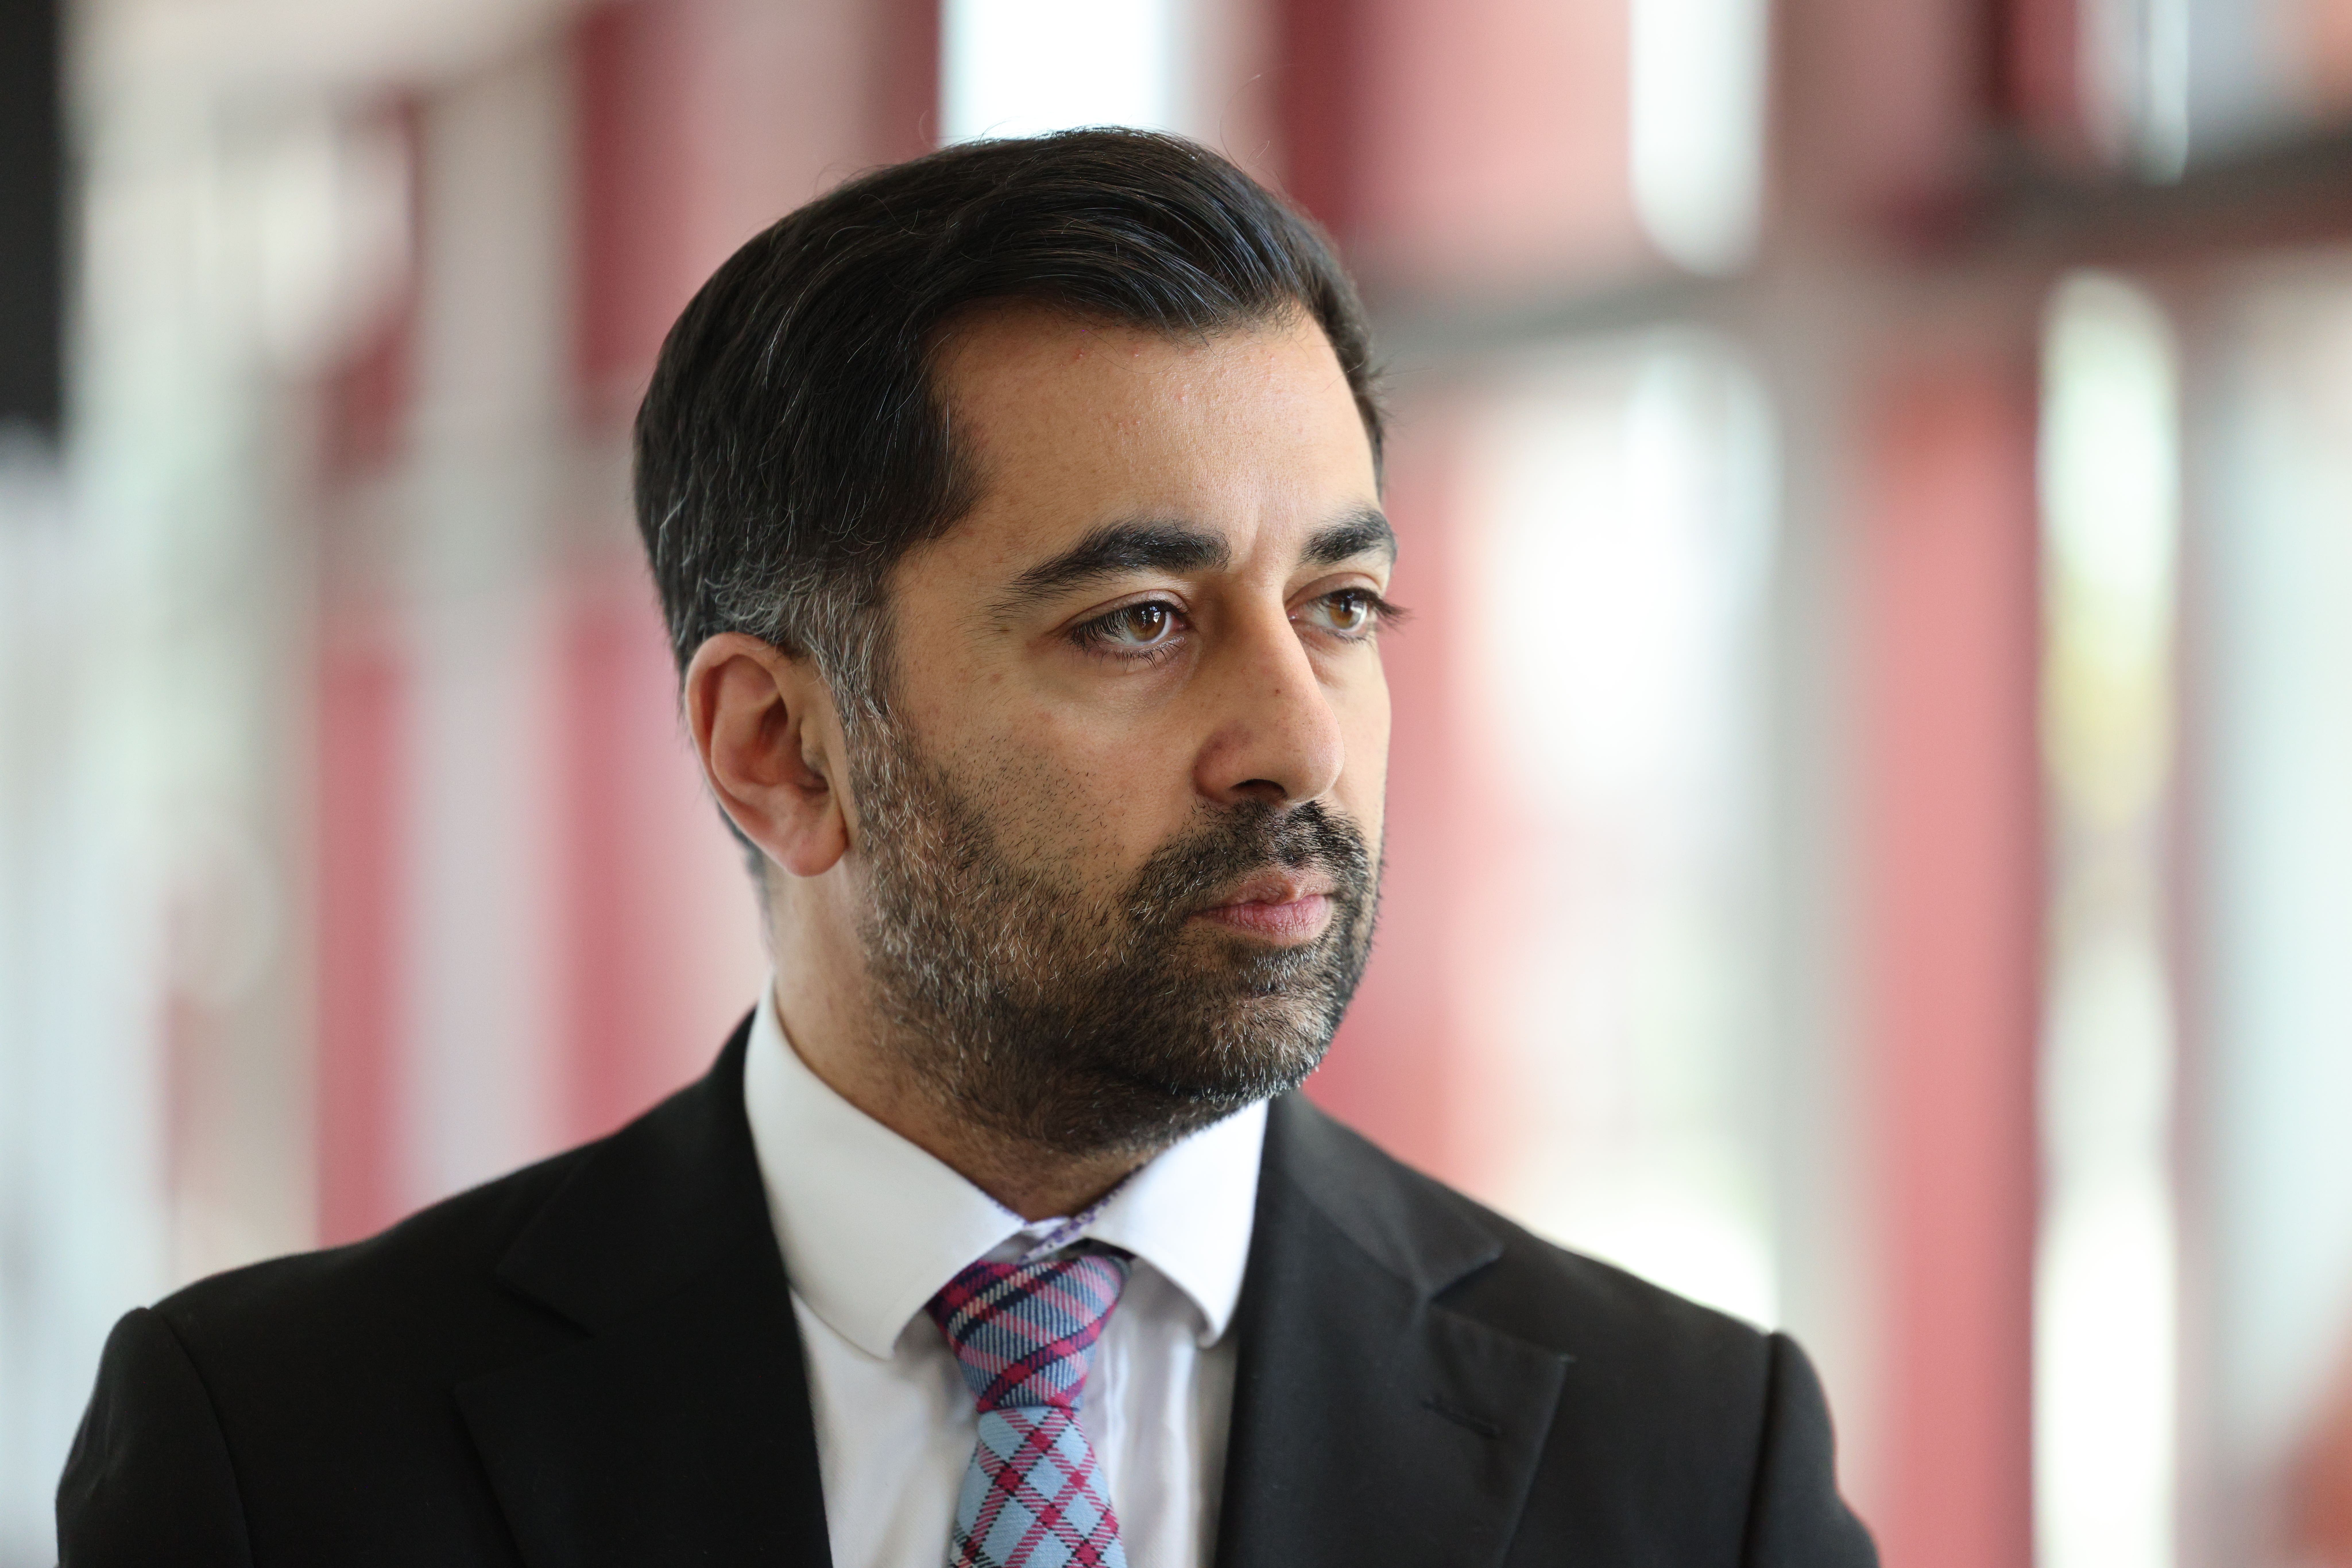 Humza Yousaf said minority governments often need help passing budgets (Robert Perry/PA)